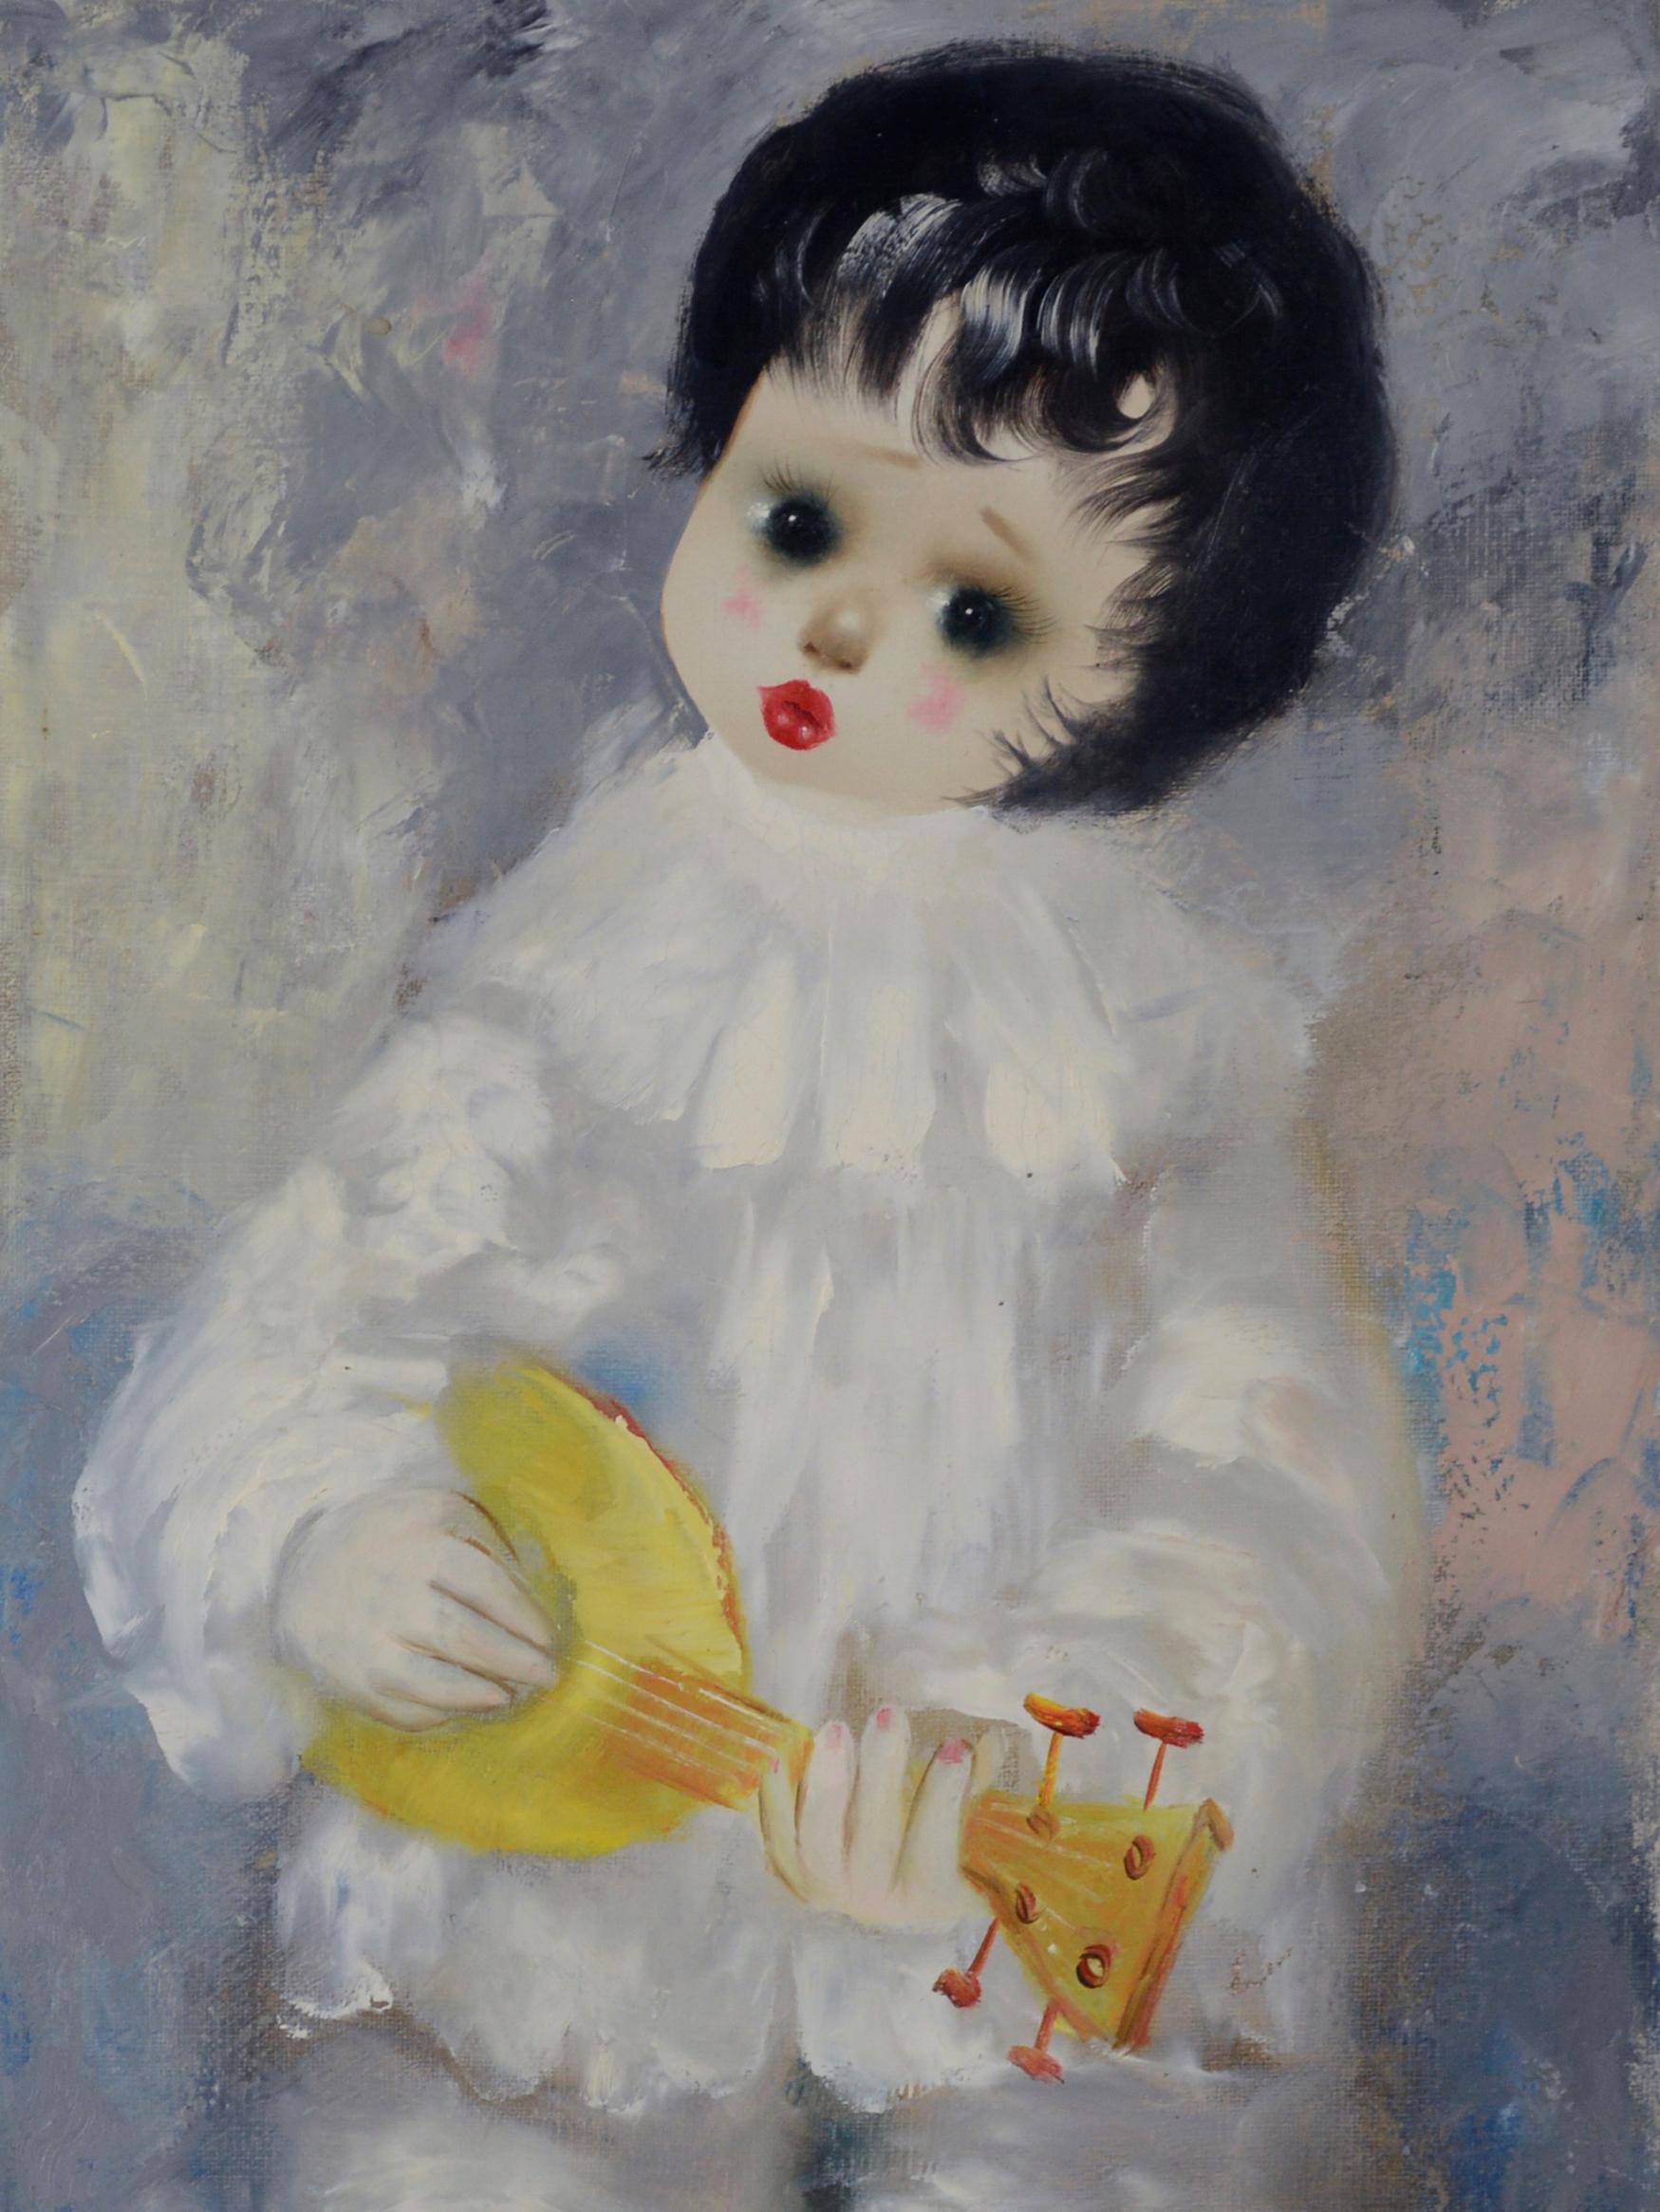 Pierrot the Musician Singing Little Girl Clown Paris - Painting by Santini Poncini